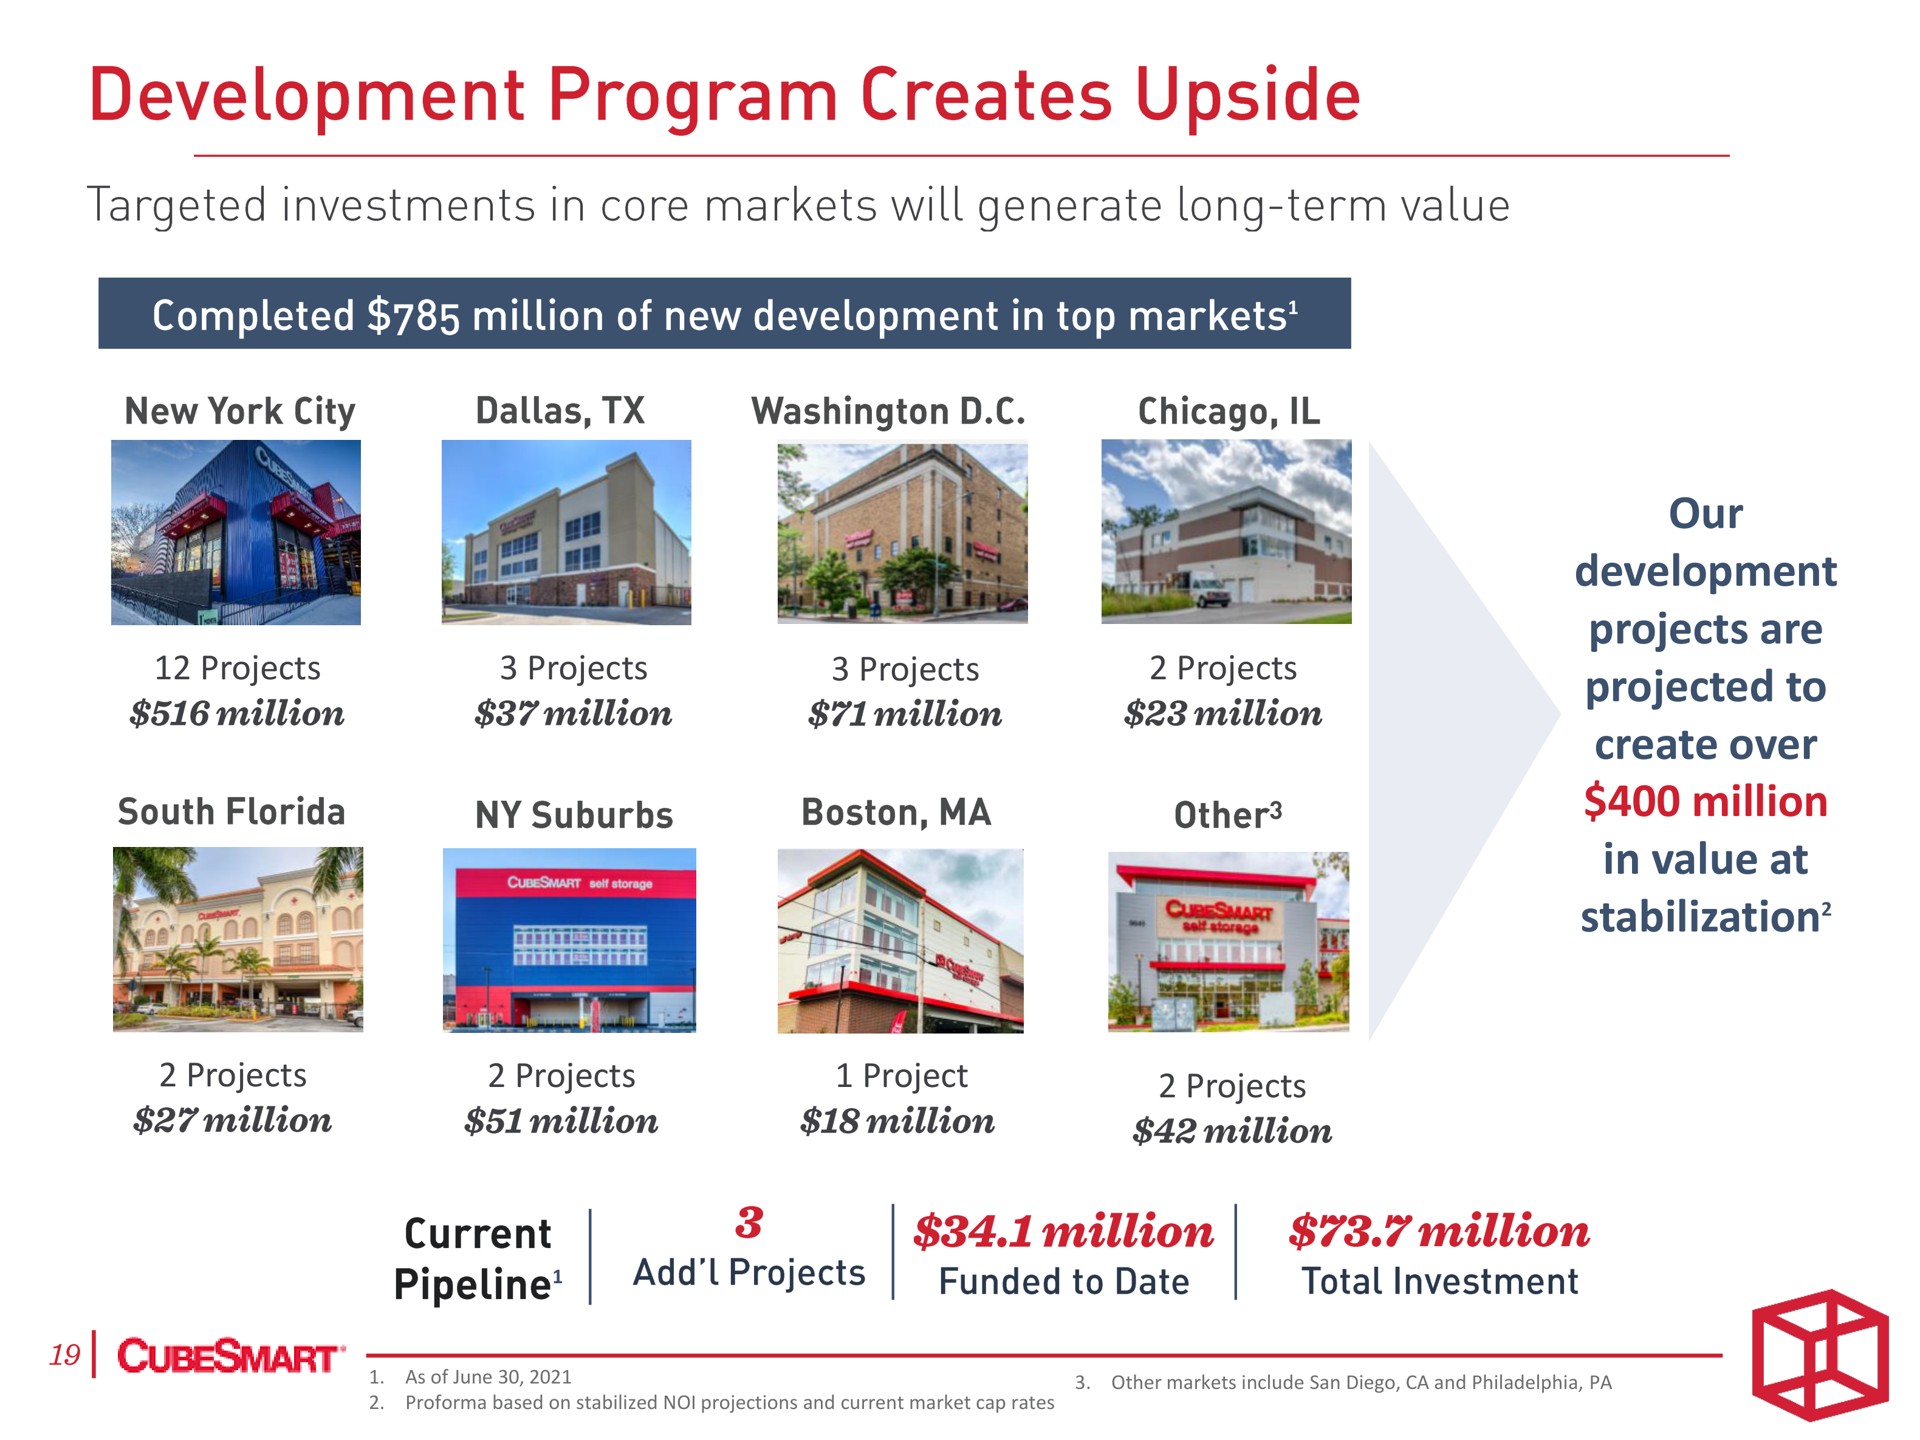 projects projects projects projects our development projects are projected to create over million in value at stabilization projects projects project projects program creates upside | CubeSmart